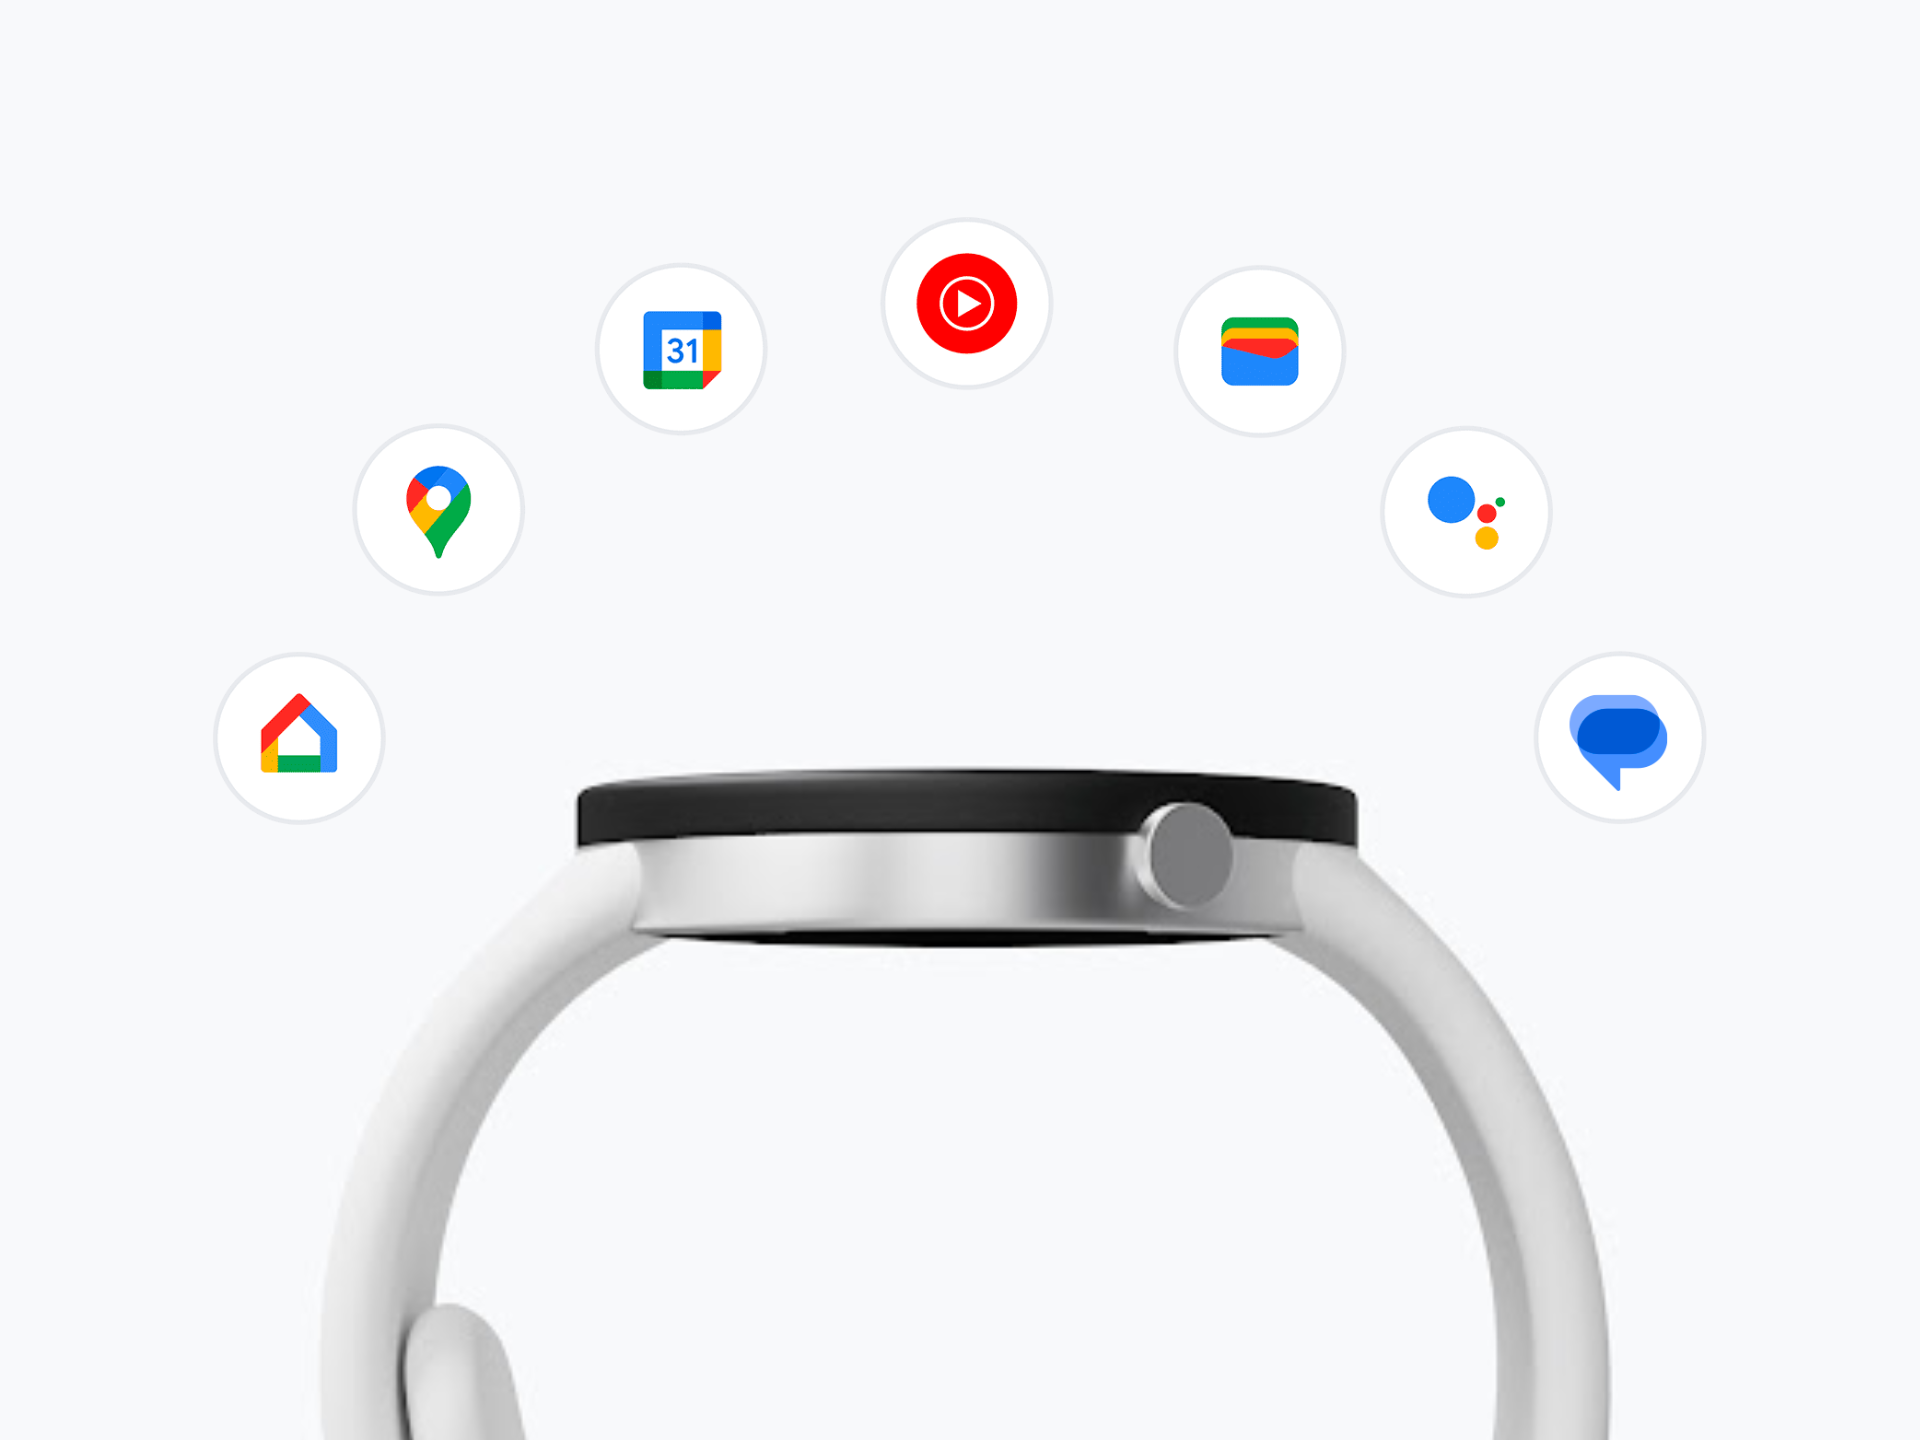 State of Google Wear OS 4: List of compatible smartwatches